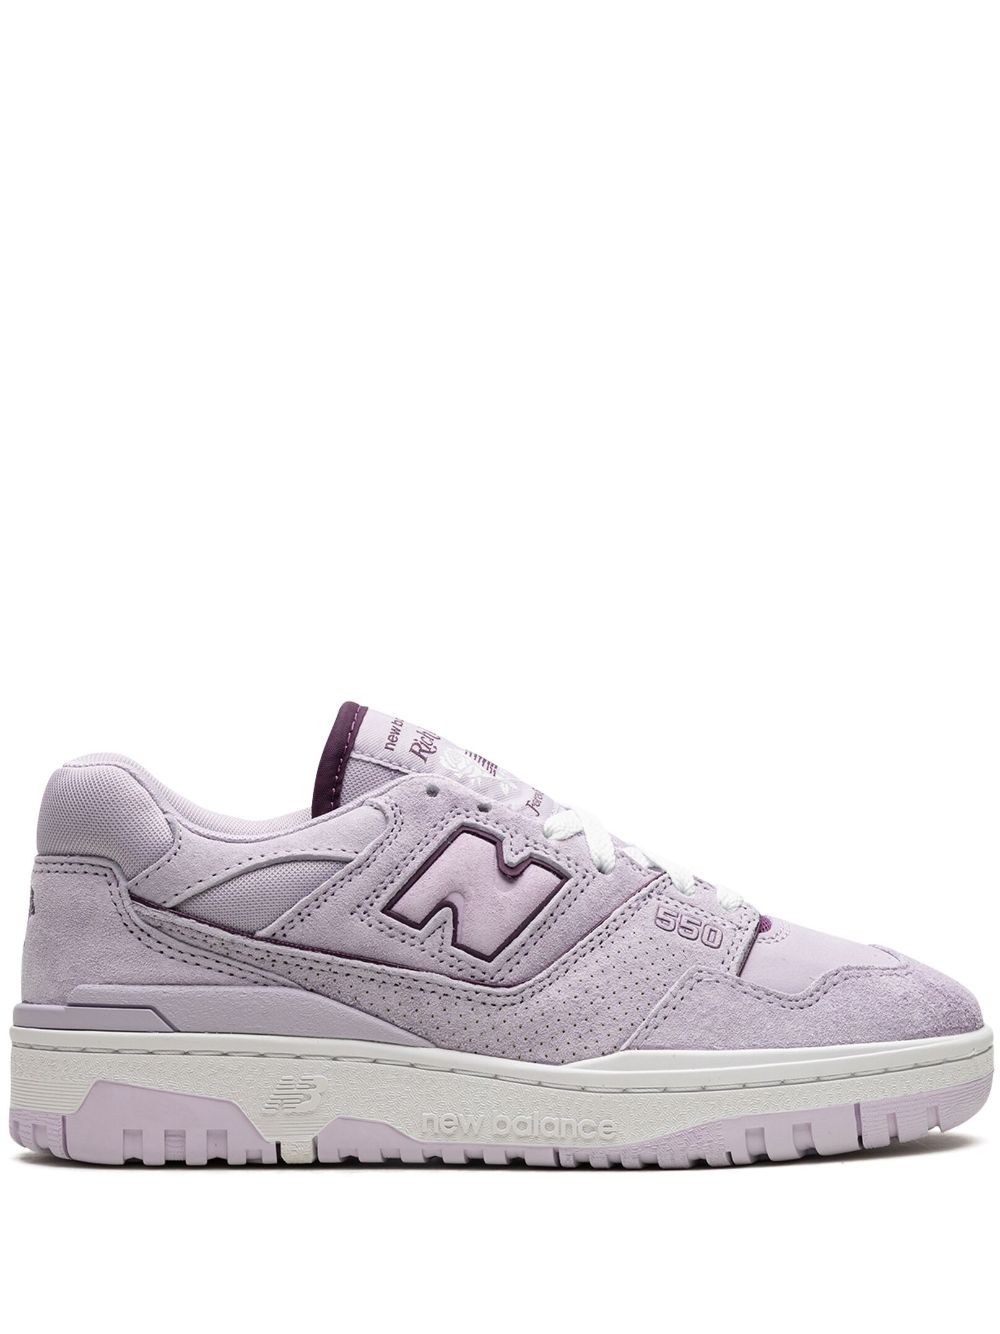 New Balance x Rich Paul 550 "Forever Yours" sneakers - Purple